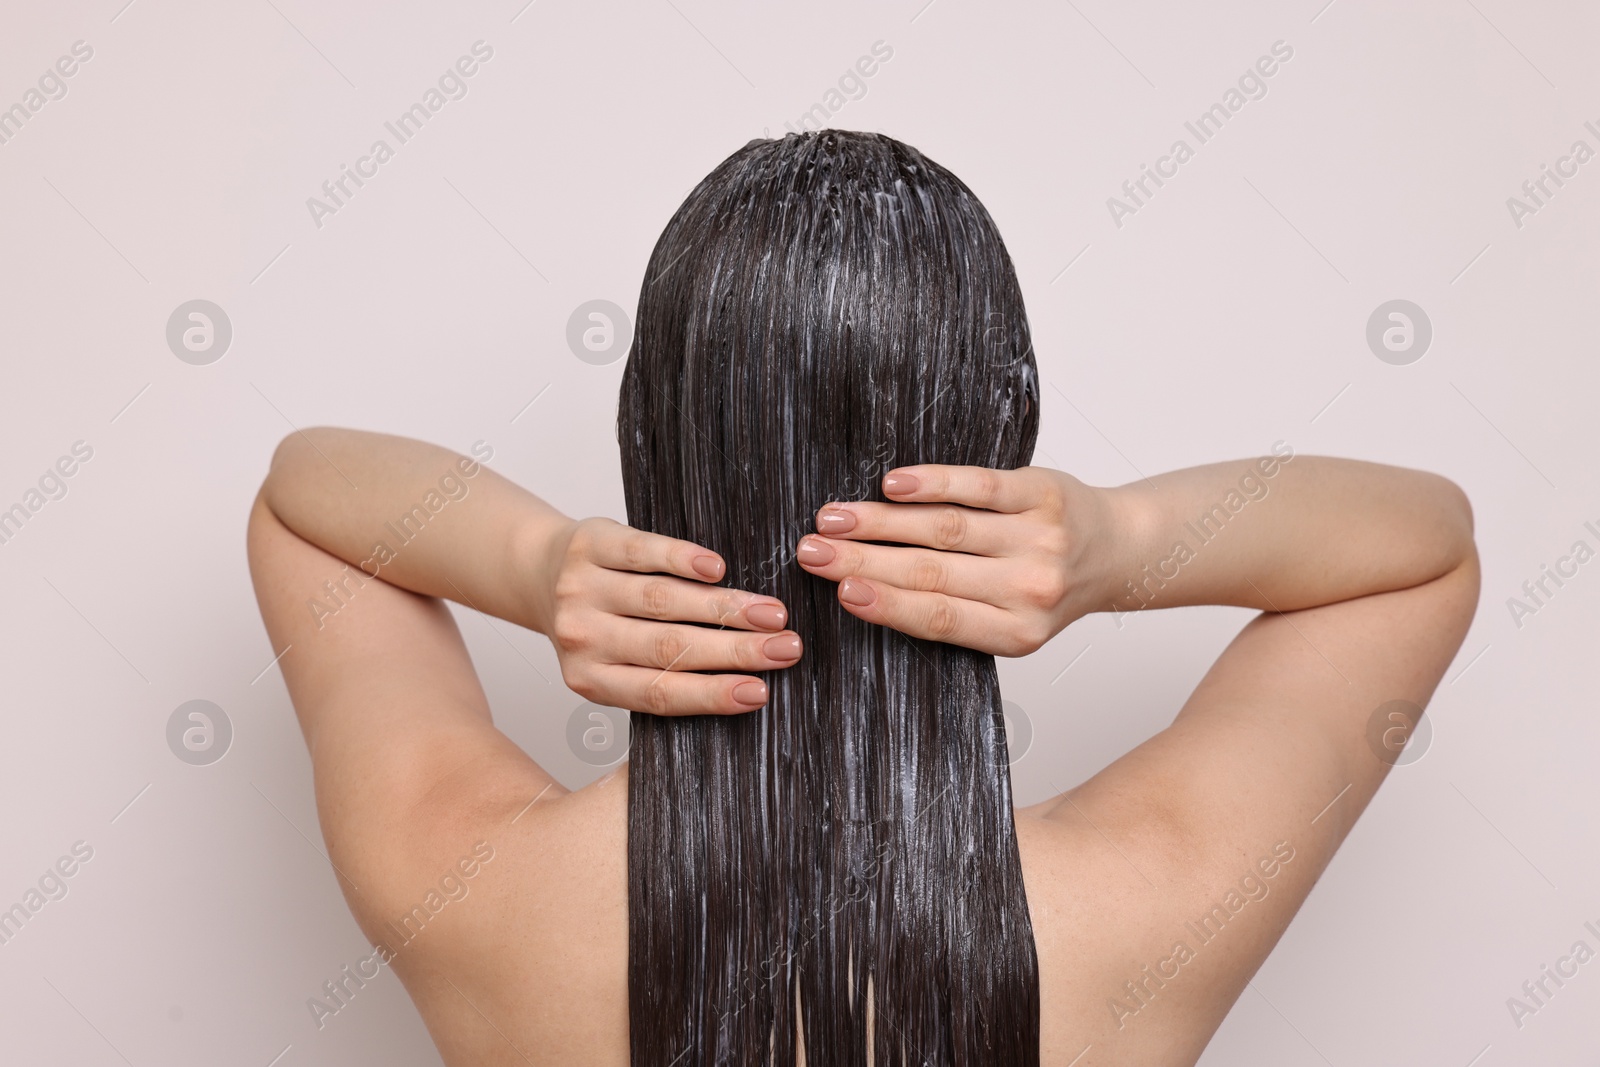 Photo of Woman applying hair mask on light background, back view